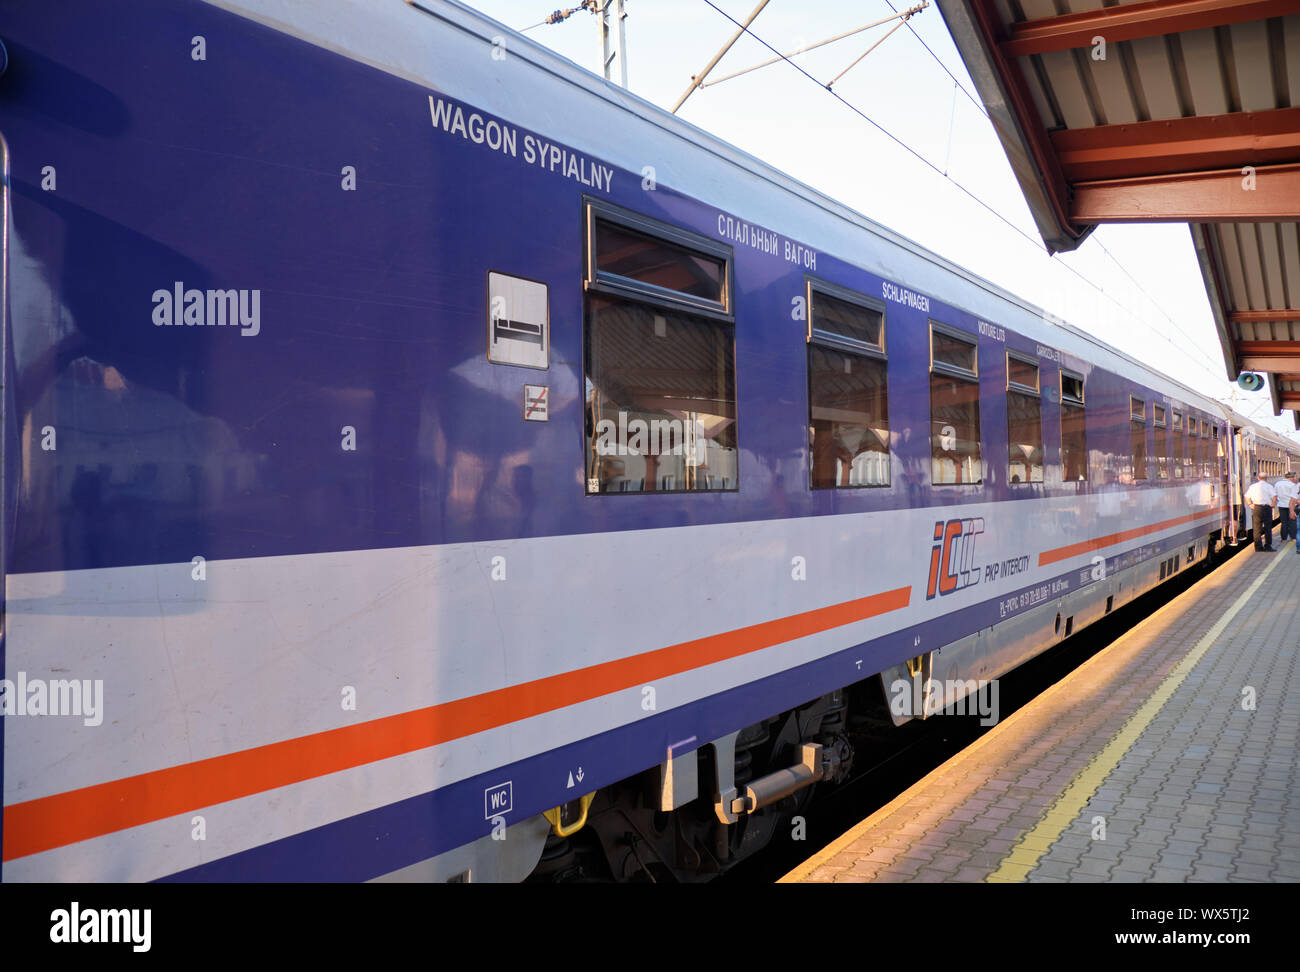 Przemysl, Poland, August 31, 2019.  PKP Intercity Polish train sleeping car at station platform awaiting departure in late afternoon Stock Photo